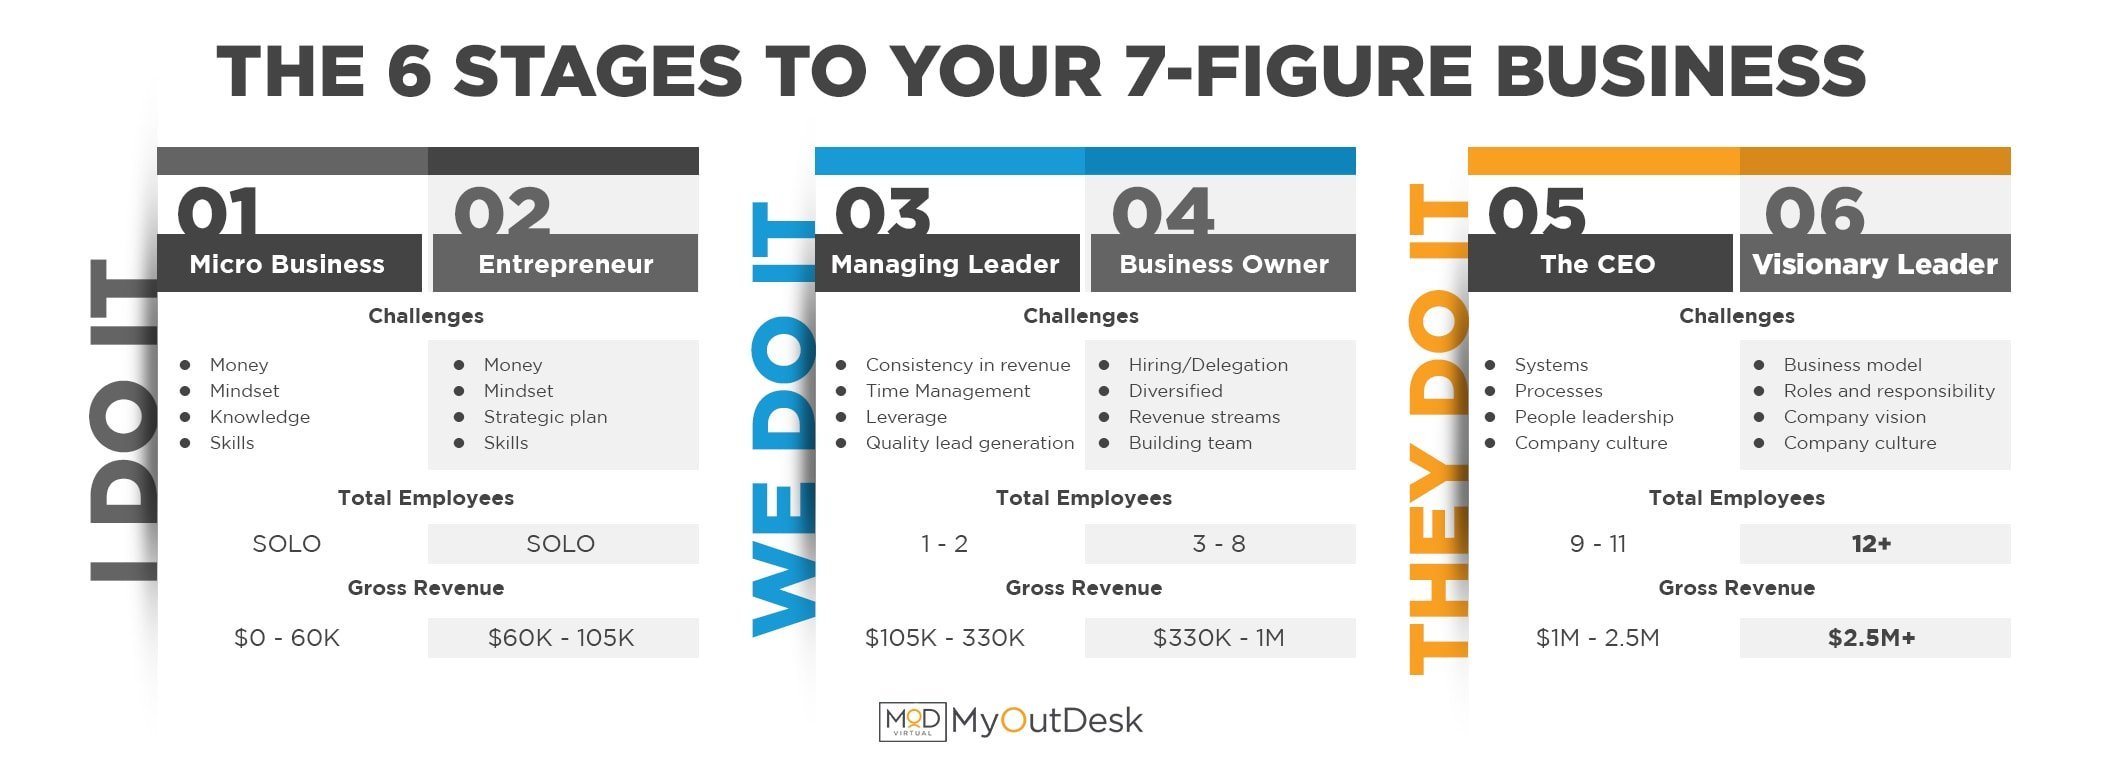 From 6 to 7 Figures OR 7 to 8 Figures: 3 Steps to Scale Your Business